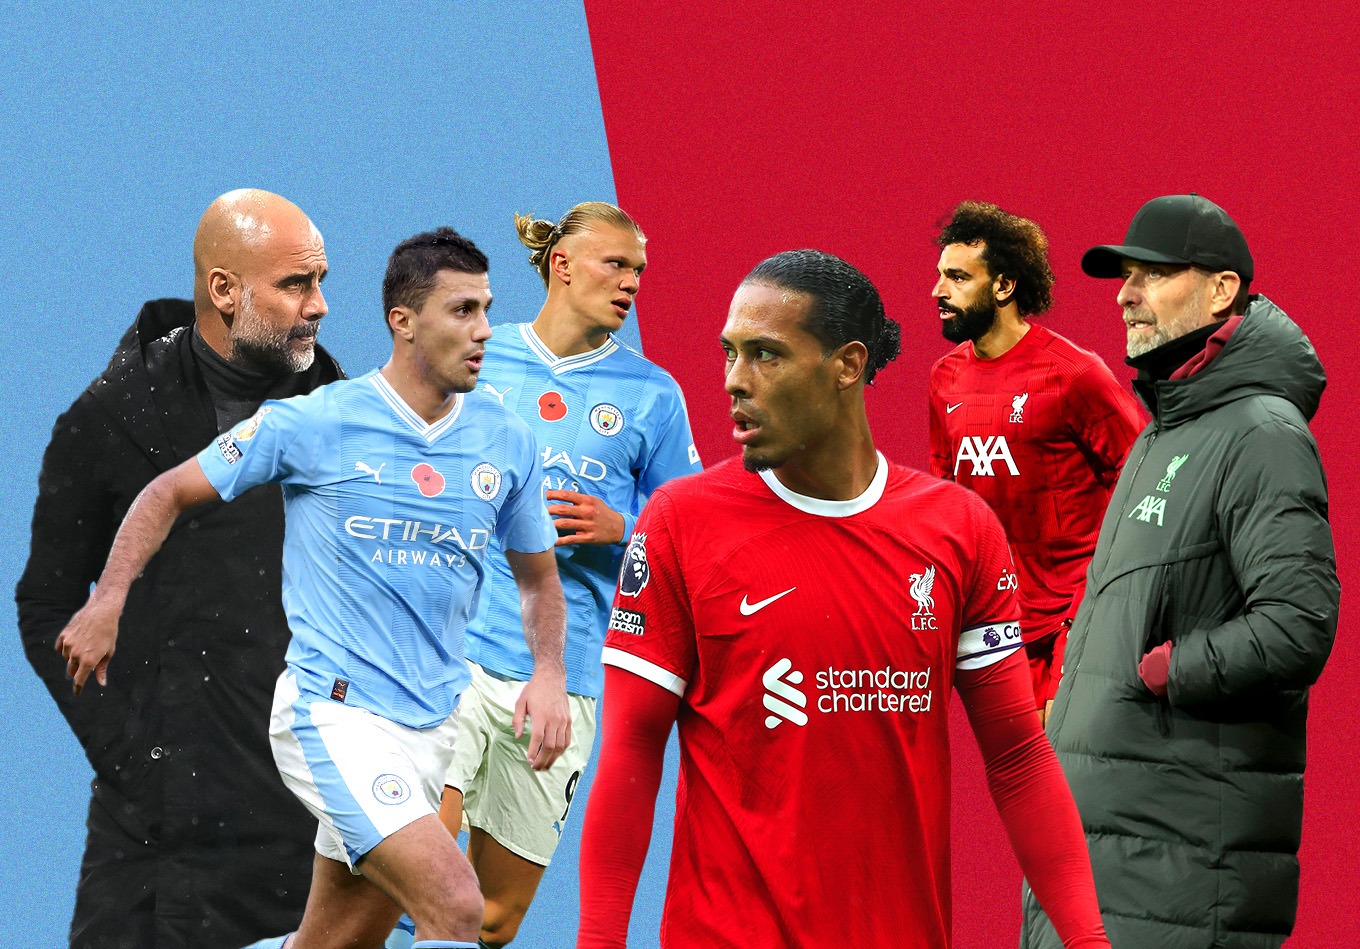 Manchester City vs Liverpool: Six Key Factors That Will Decide the Game